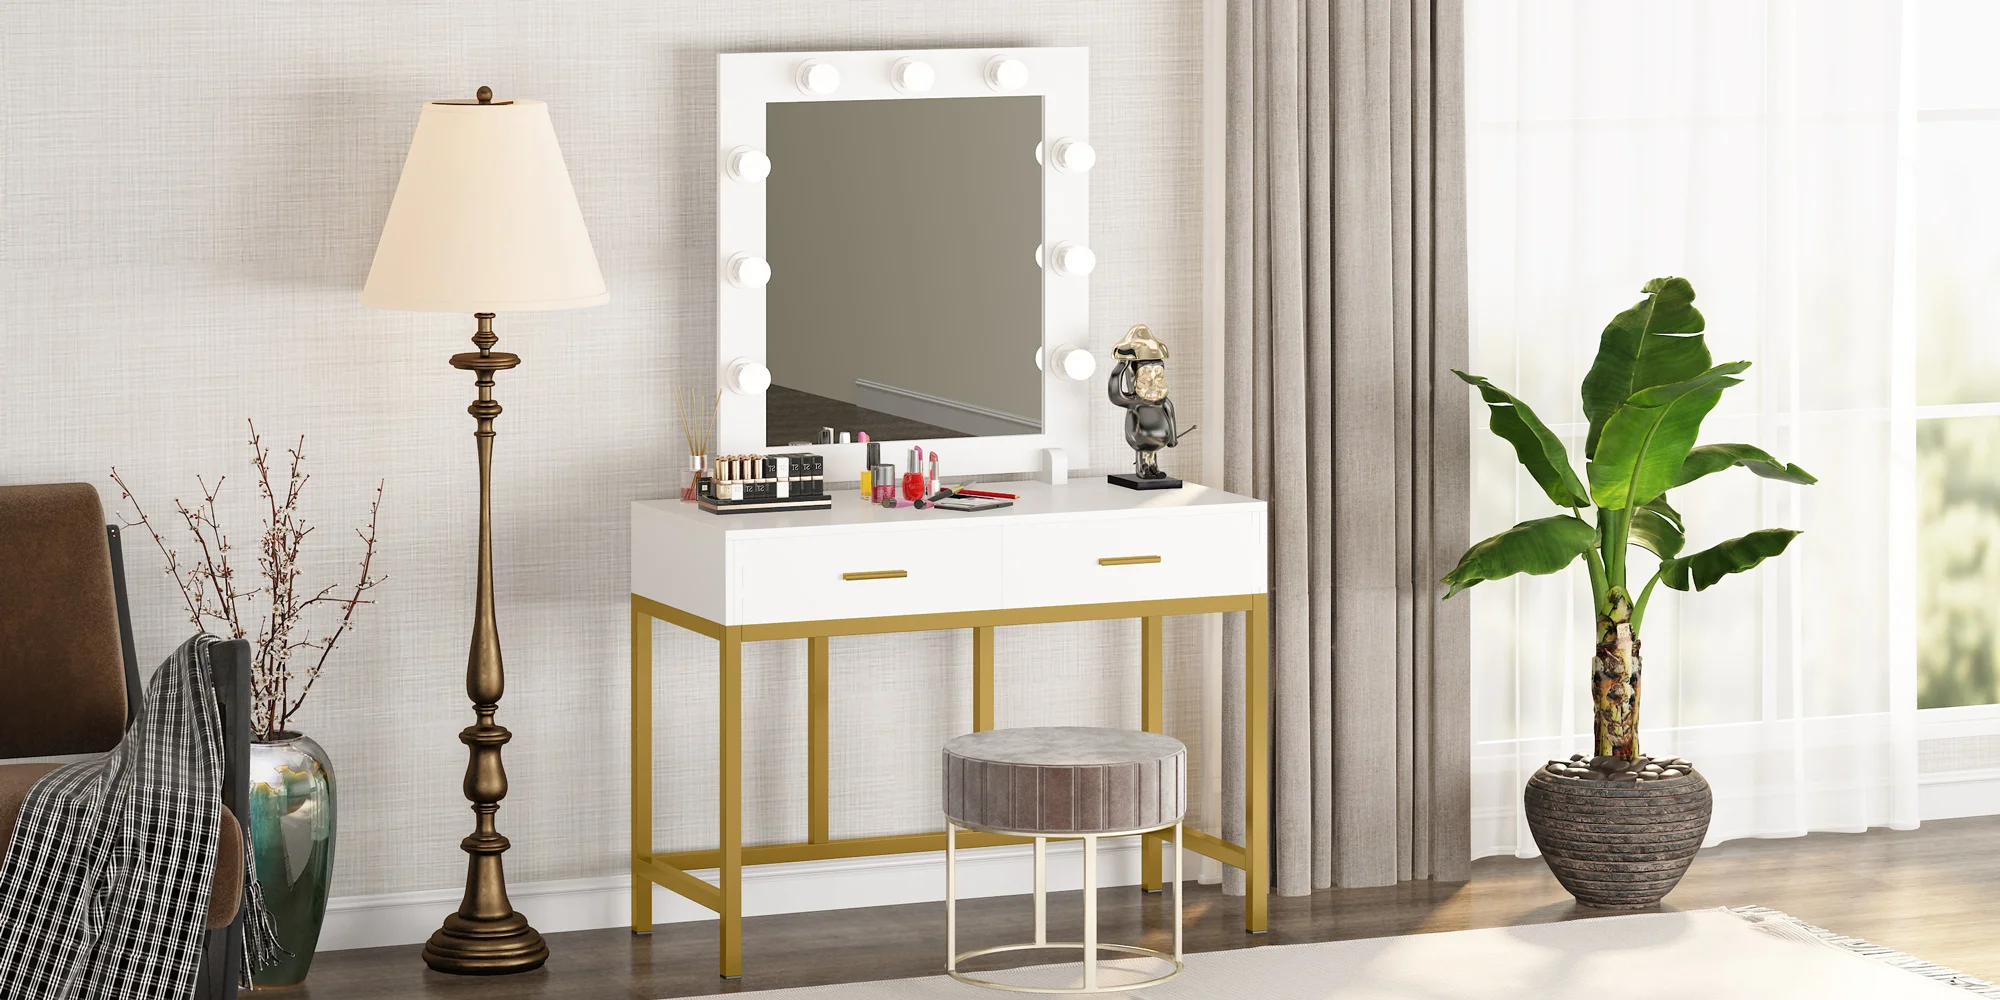 Tribesigns vanity  dressing table with led light makeup mirror for  bedroom